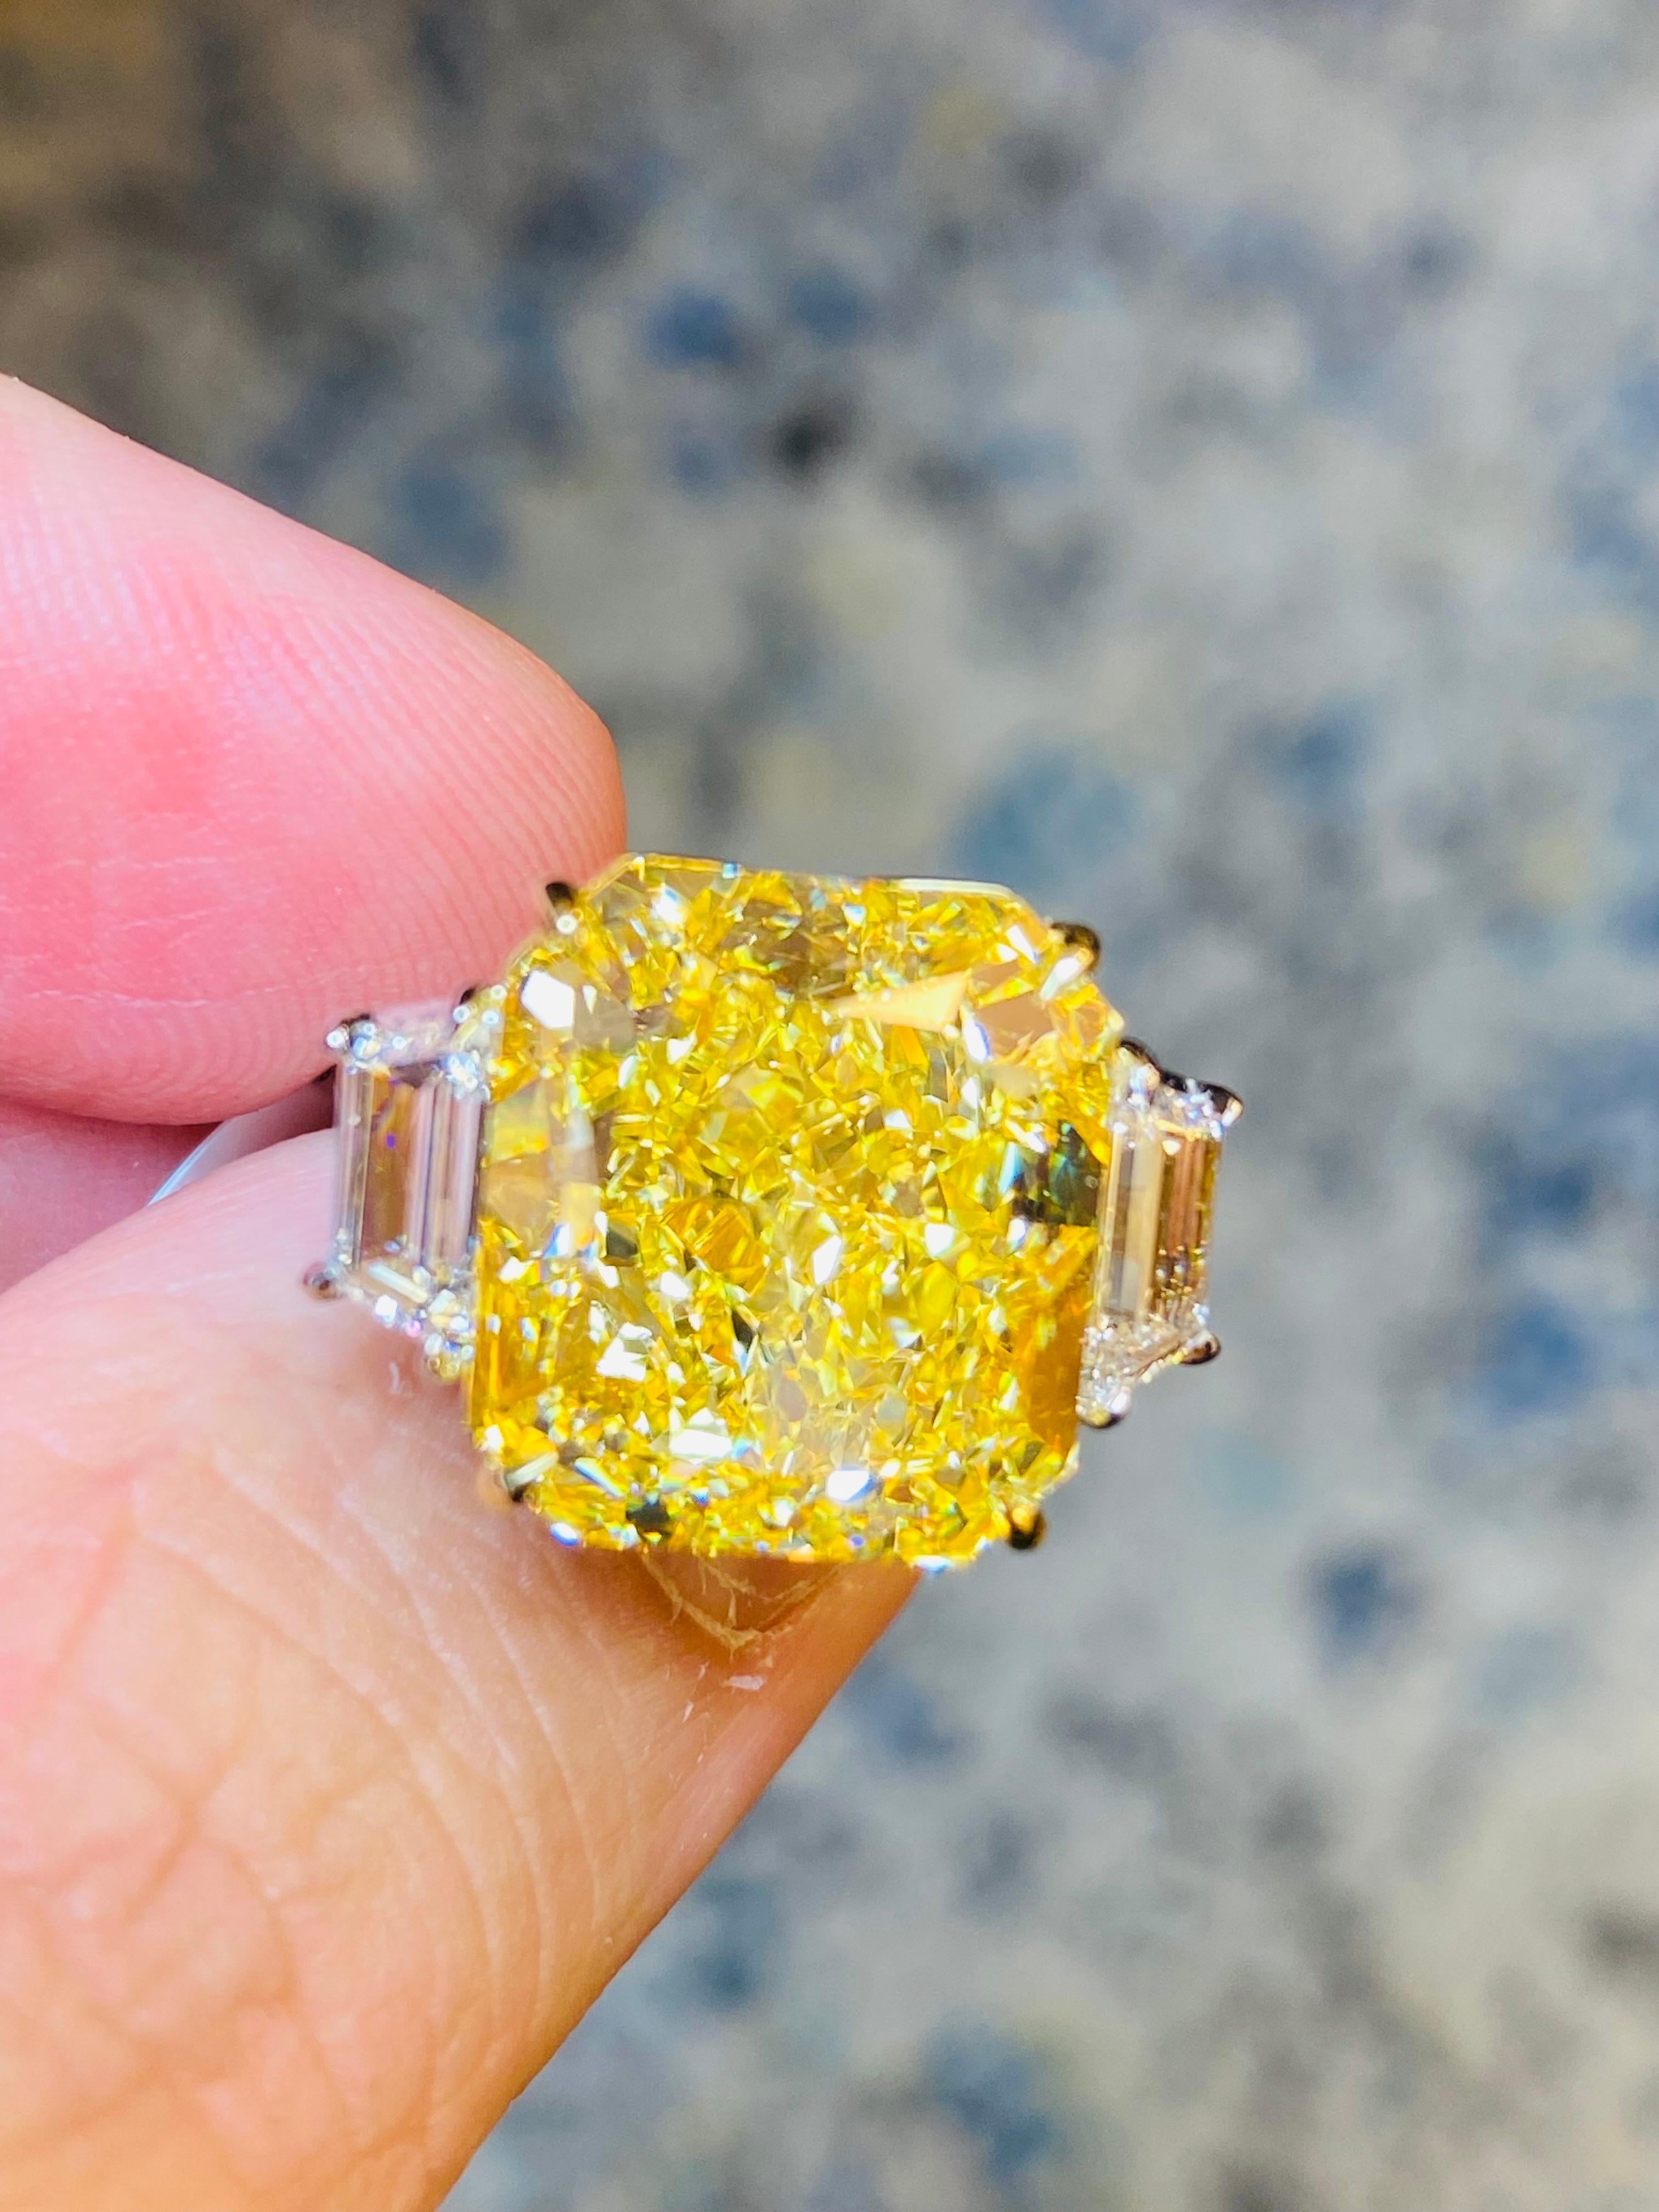 From Emilio Jewelry, a well known and respected wholesaler/dealer located on New York’s iconic Fifth Avenue,
The focal point of this ring is featuring a Gia certified natural Fancy Intense yellow diamond with a true golden appearance set in the